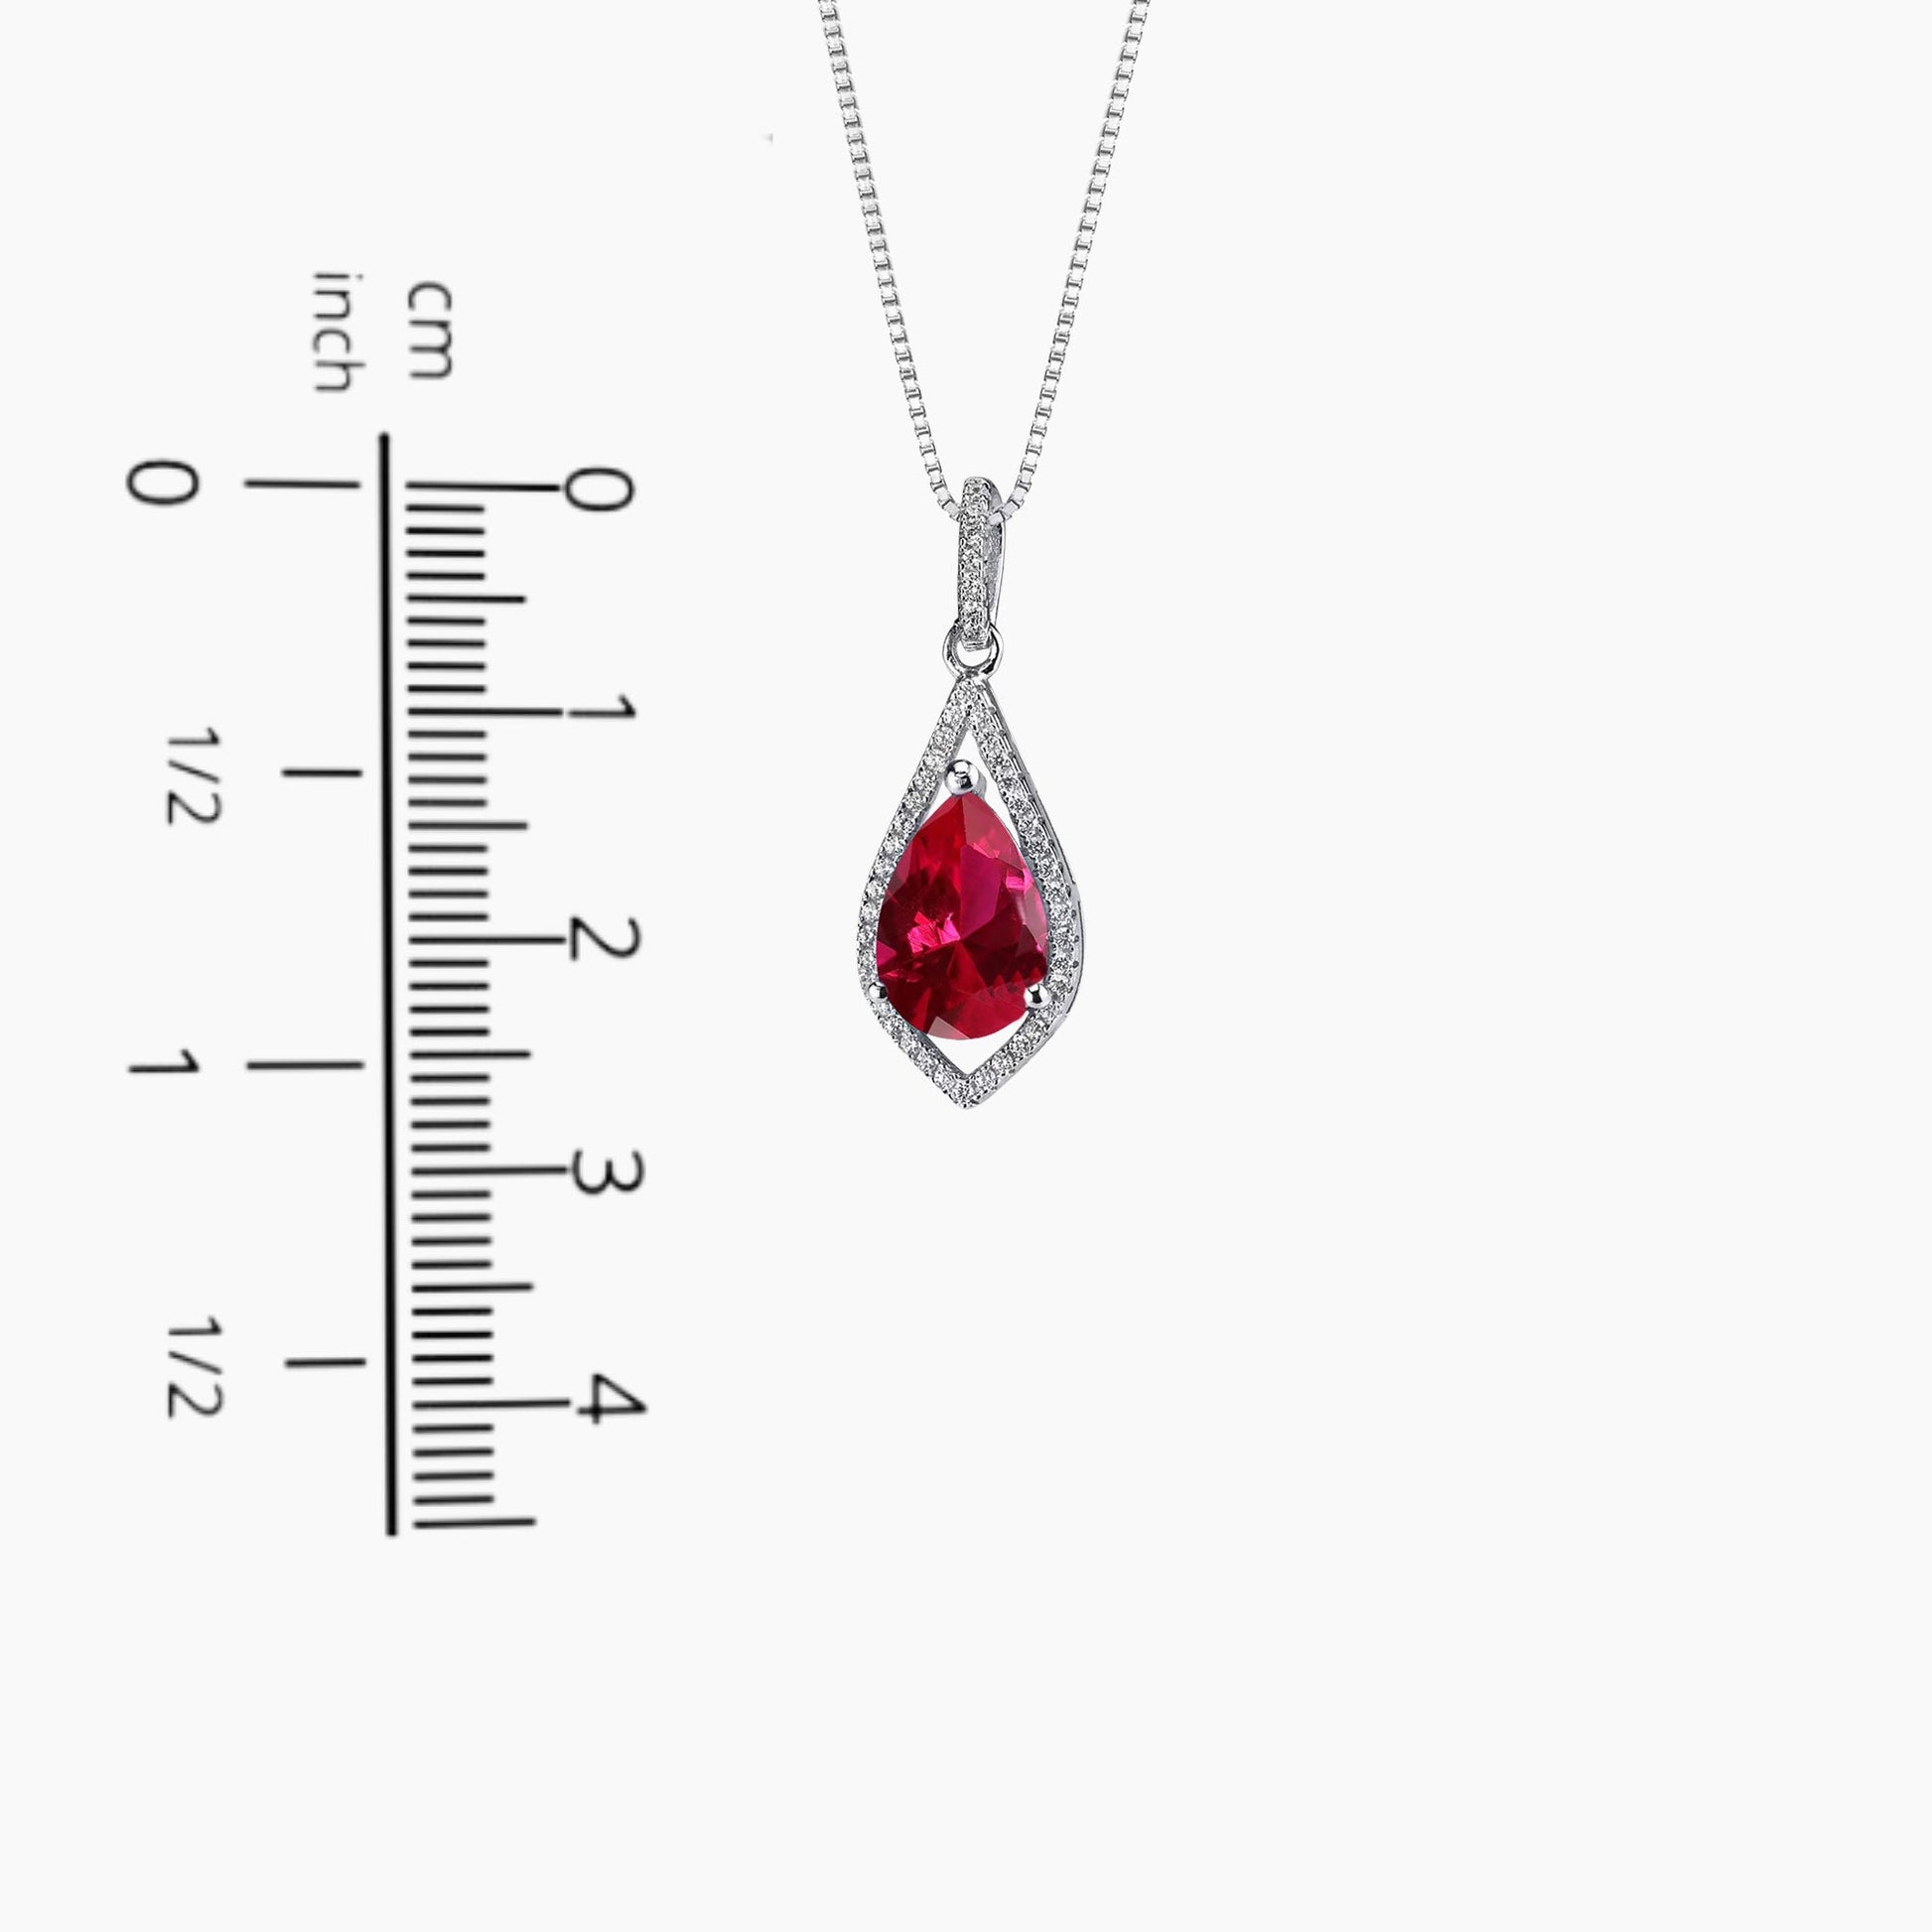  Find your perfect fit with our Solitaire Pendant Necklace sizing guide.